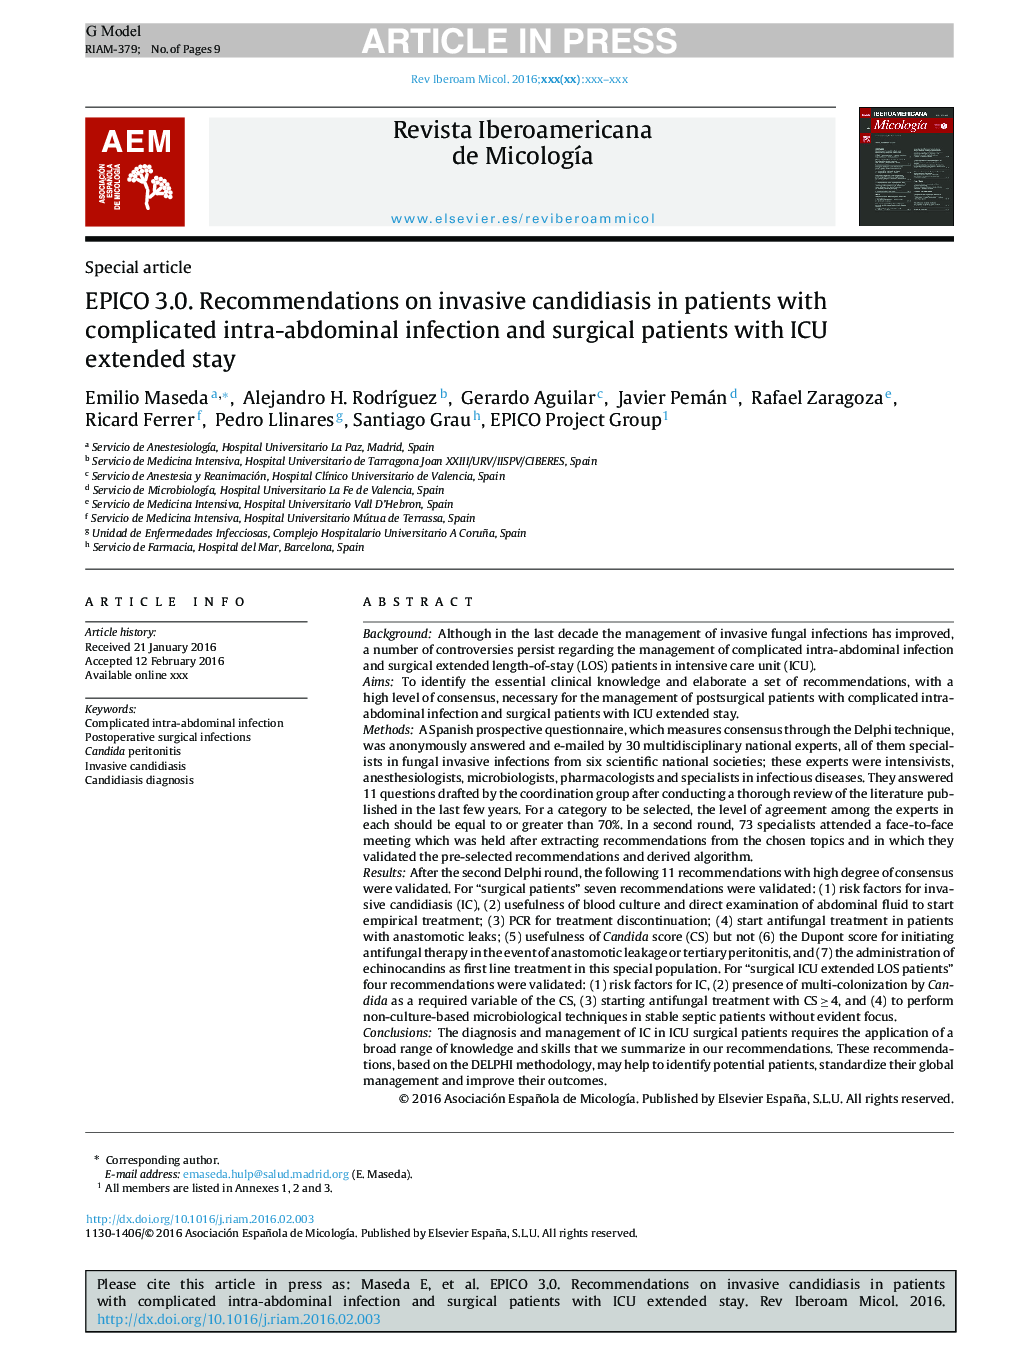 EPICO 3.0. Recommendations on invasive candidiasis in patients with complicated intra-abdominal infection and surgical patients with ICU extended stay